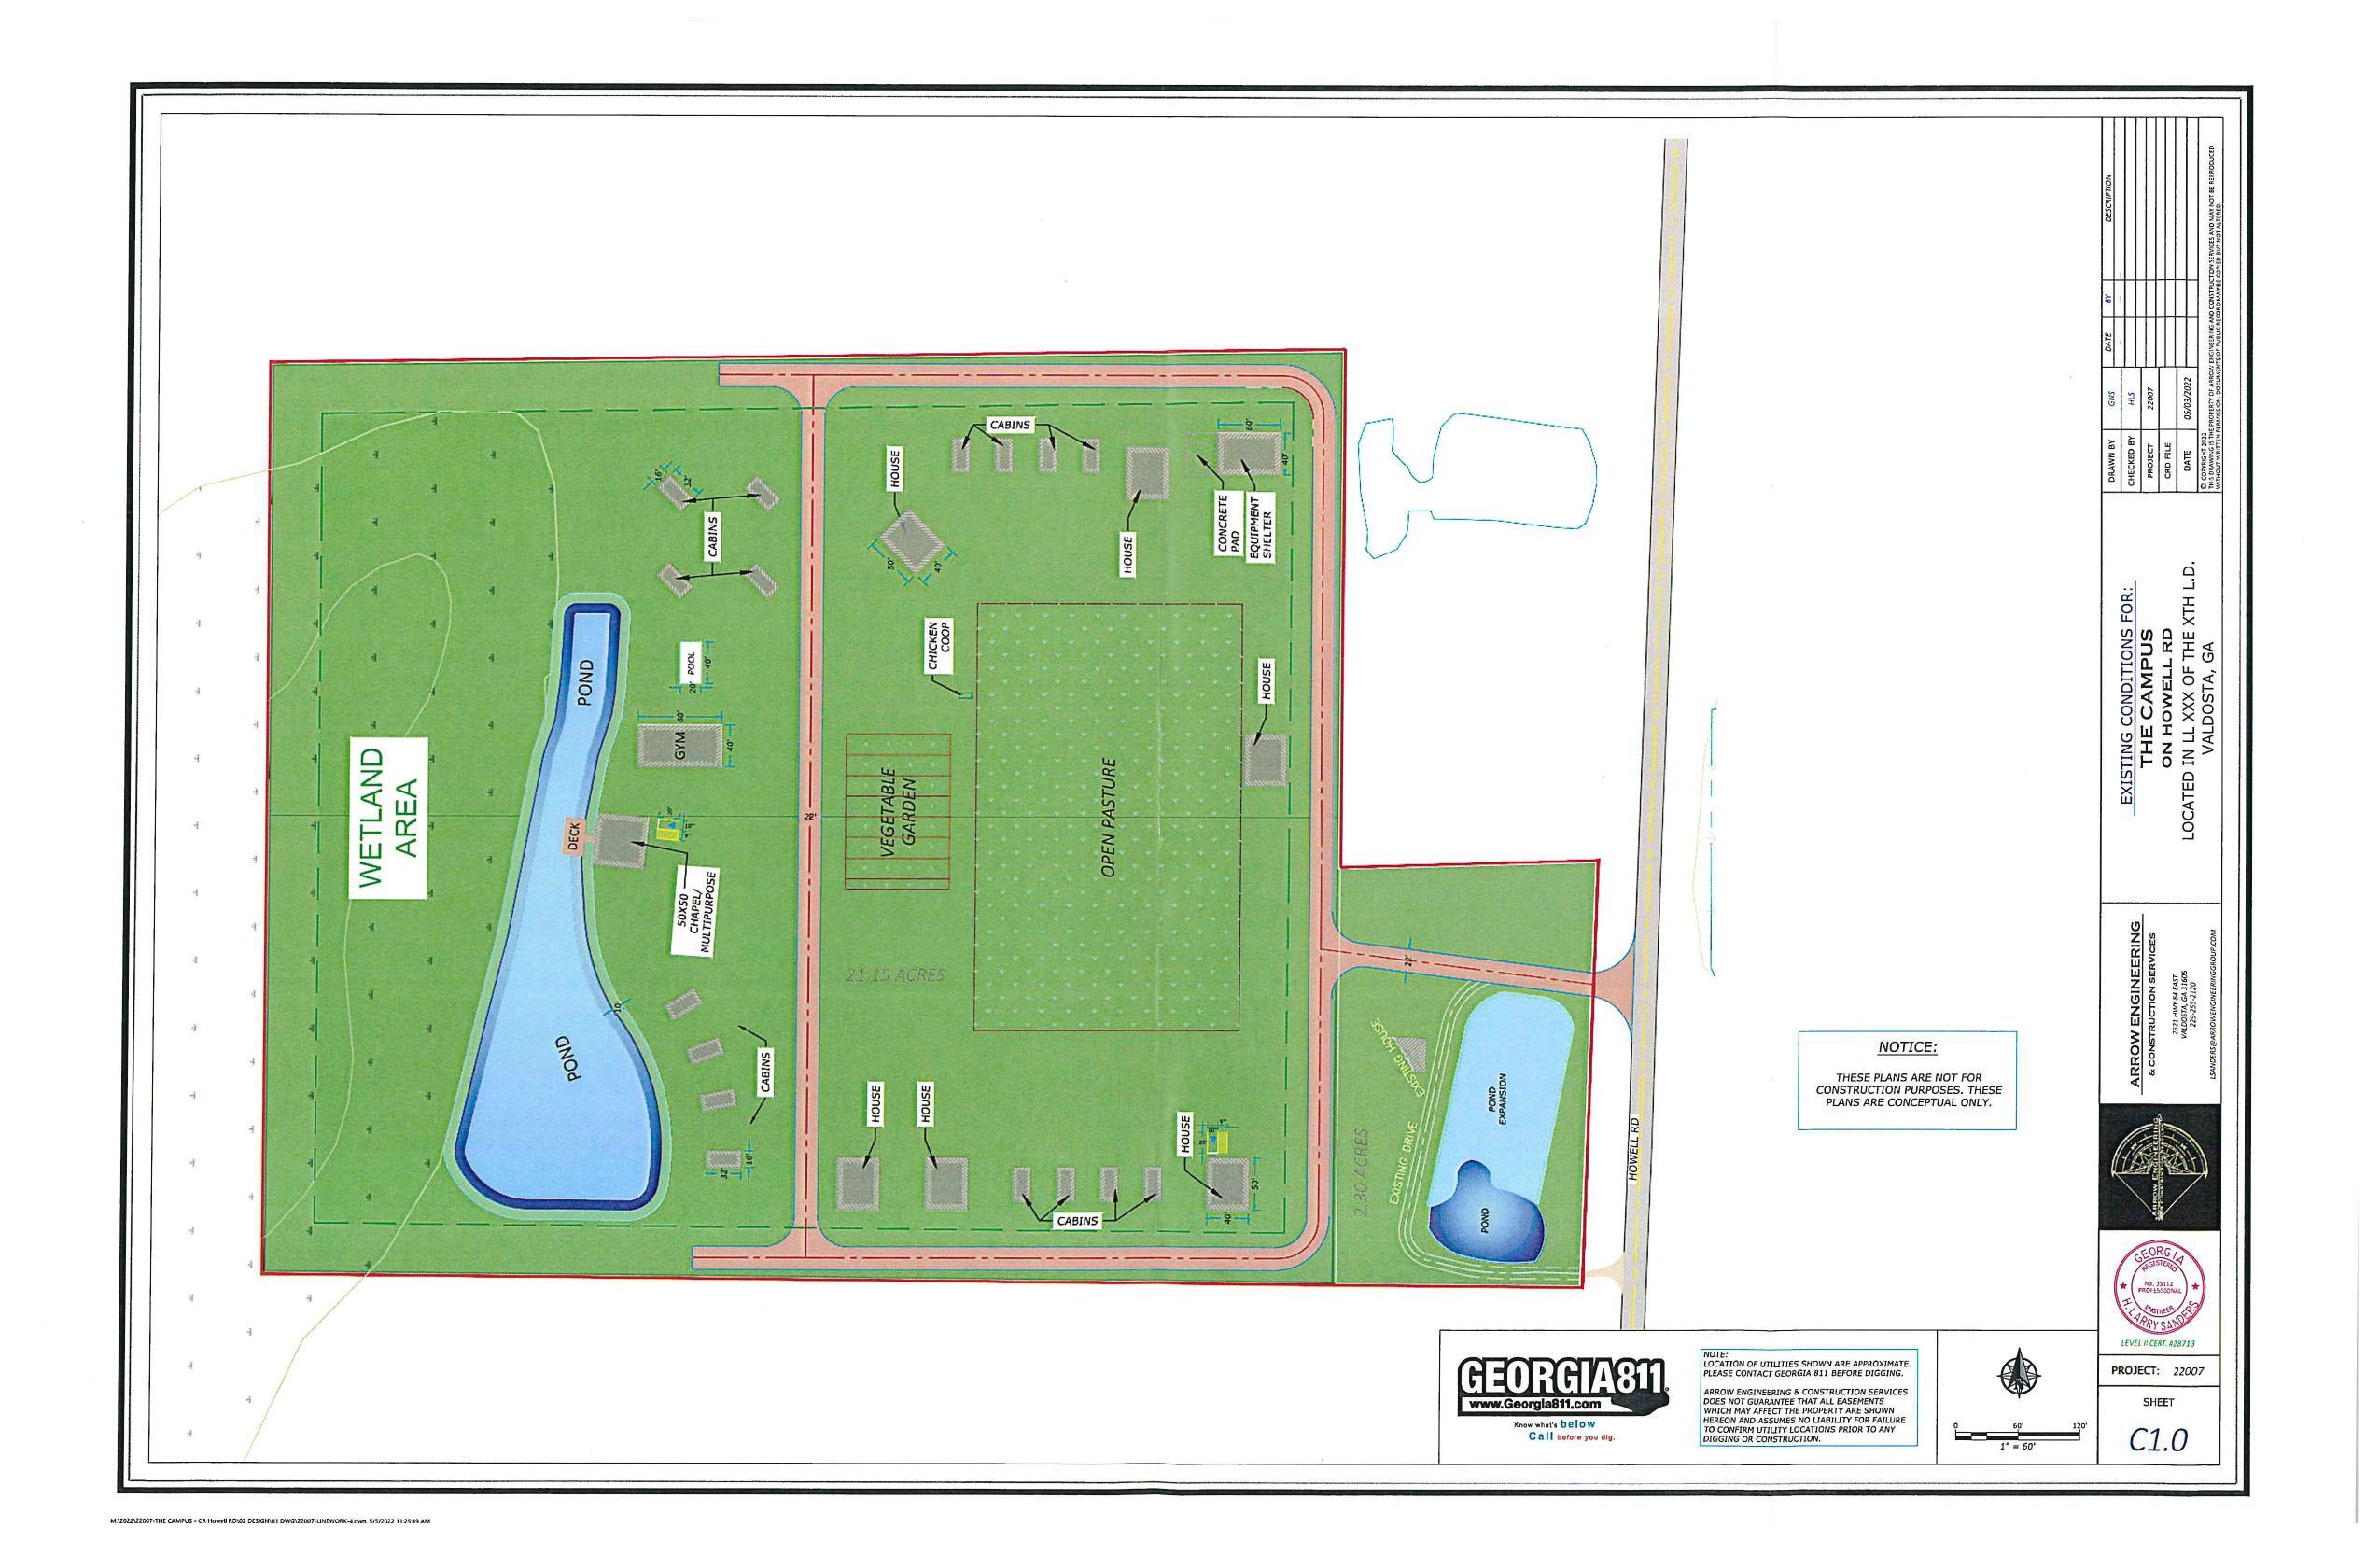 Campus map with Wetland Area